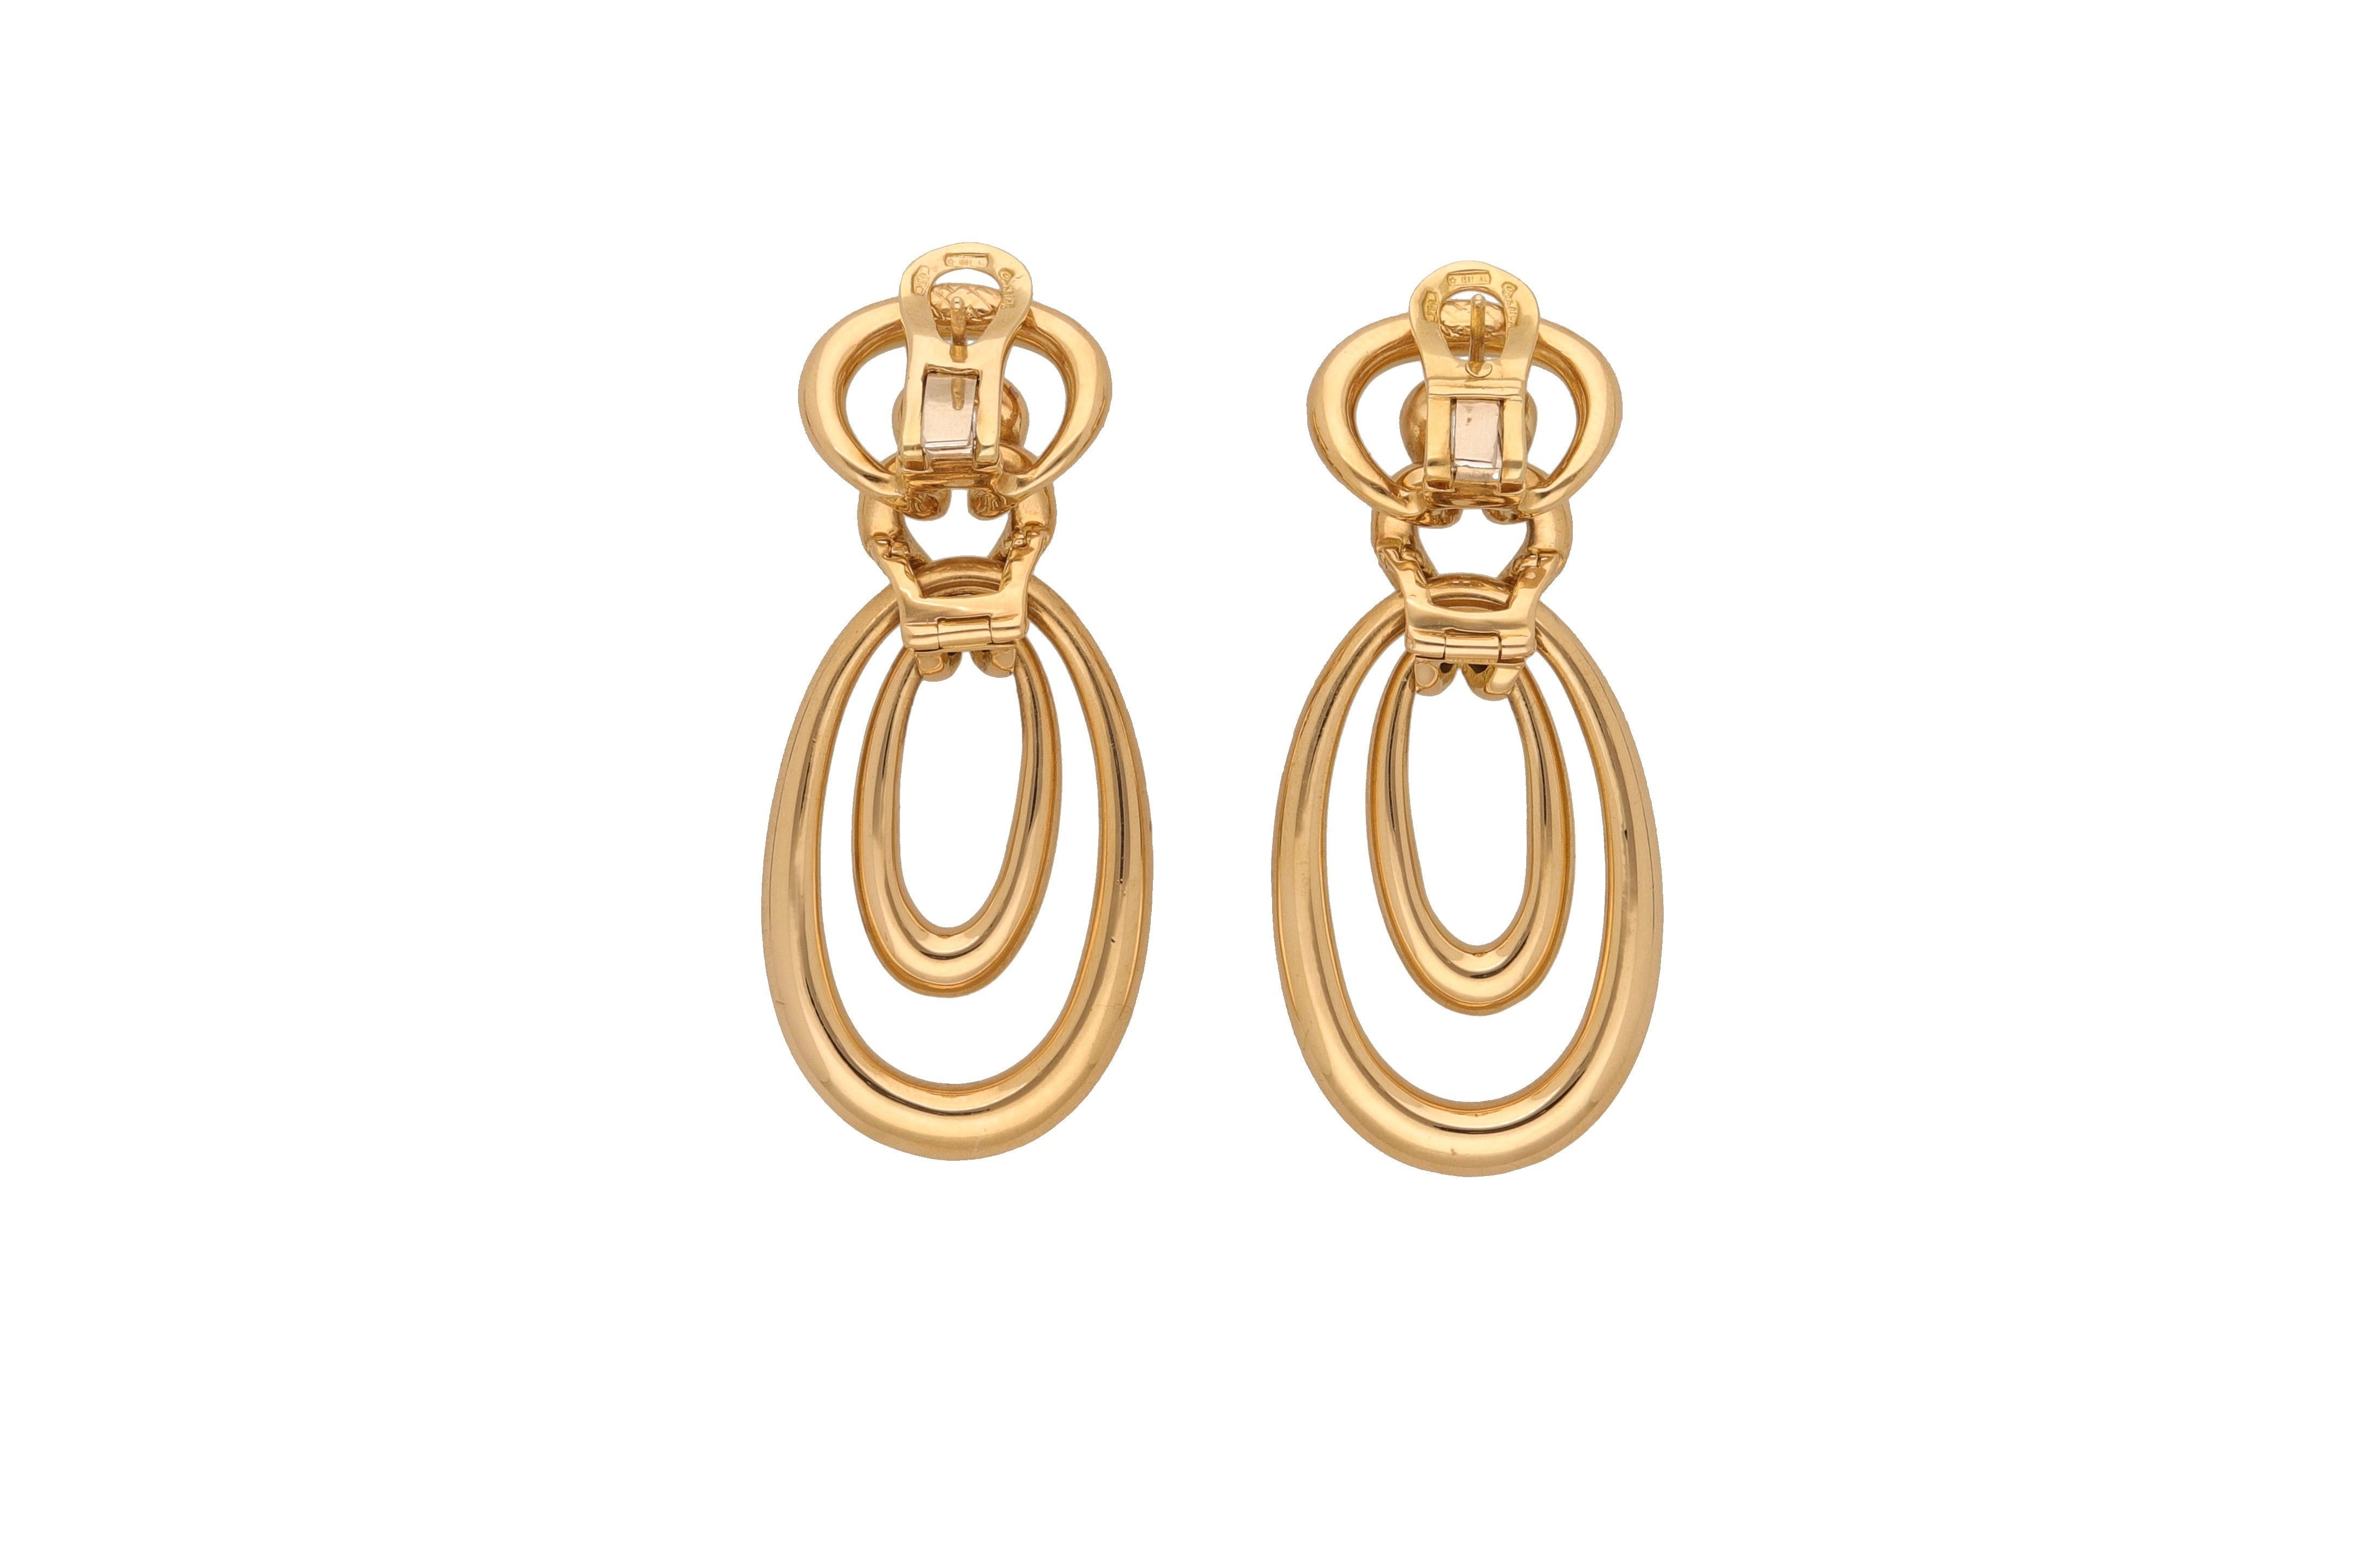 18 kt. yellow gold earrings signed by Cartier.
This classic pair of earrings are hand-made and comes with the original box.
Lenght cm. 5.50
Weight gr. 41.20
1980 ca.